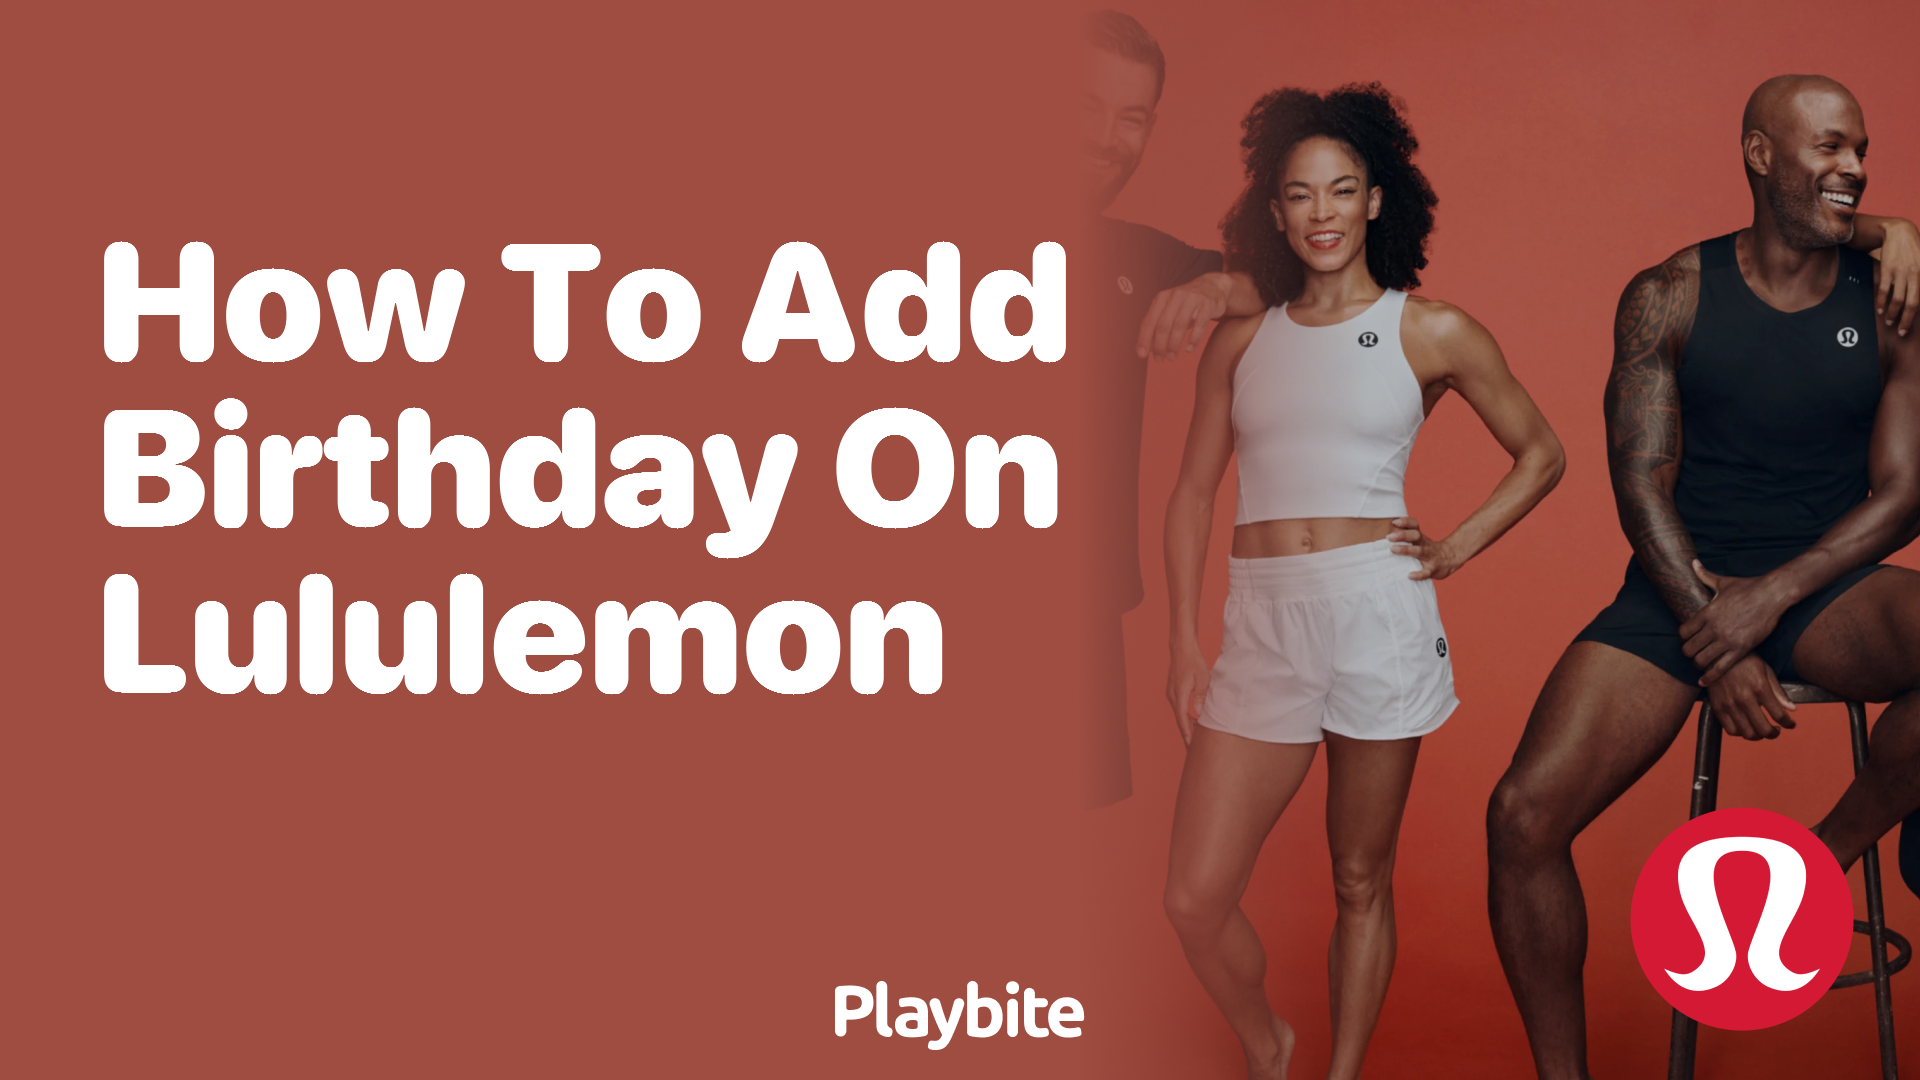 How to Add Your Birthday on Lululemon for Sweet Rewards - Playbite